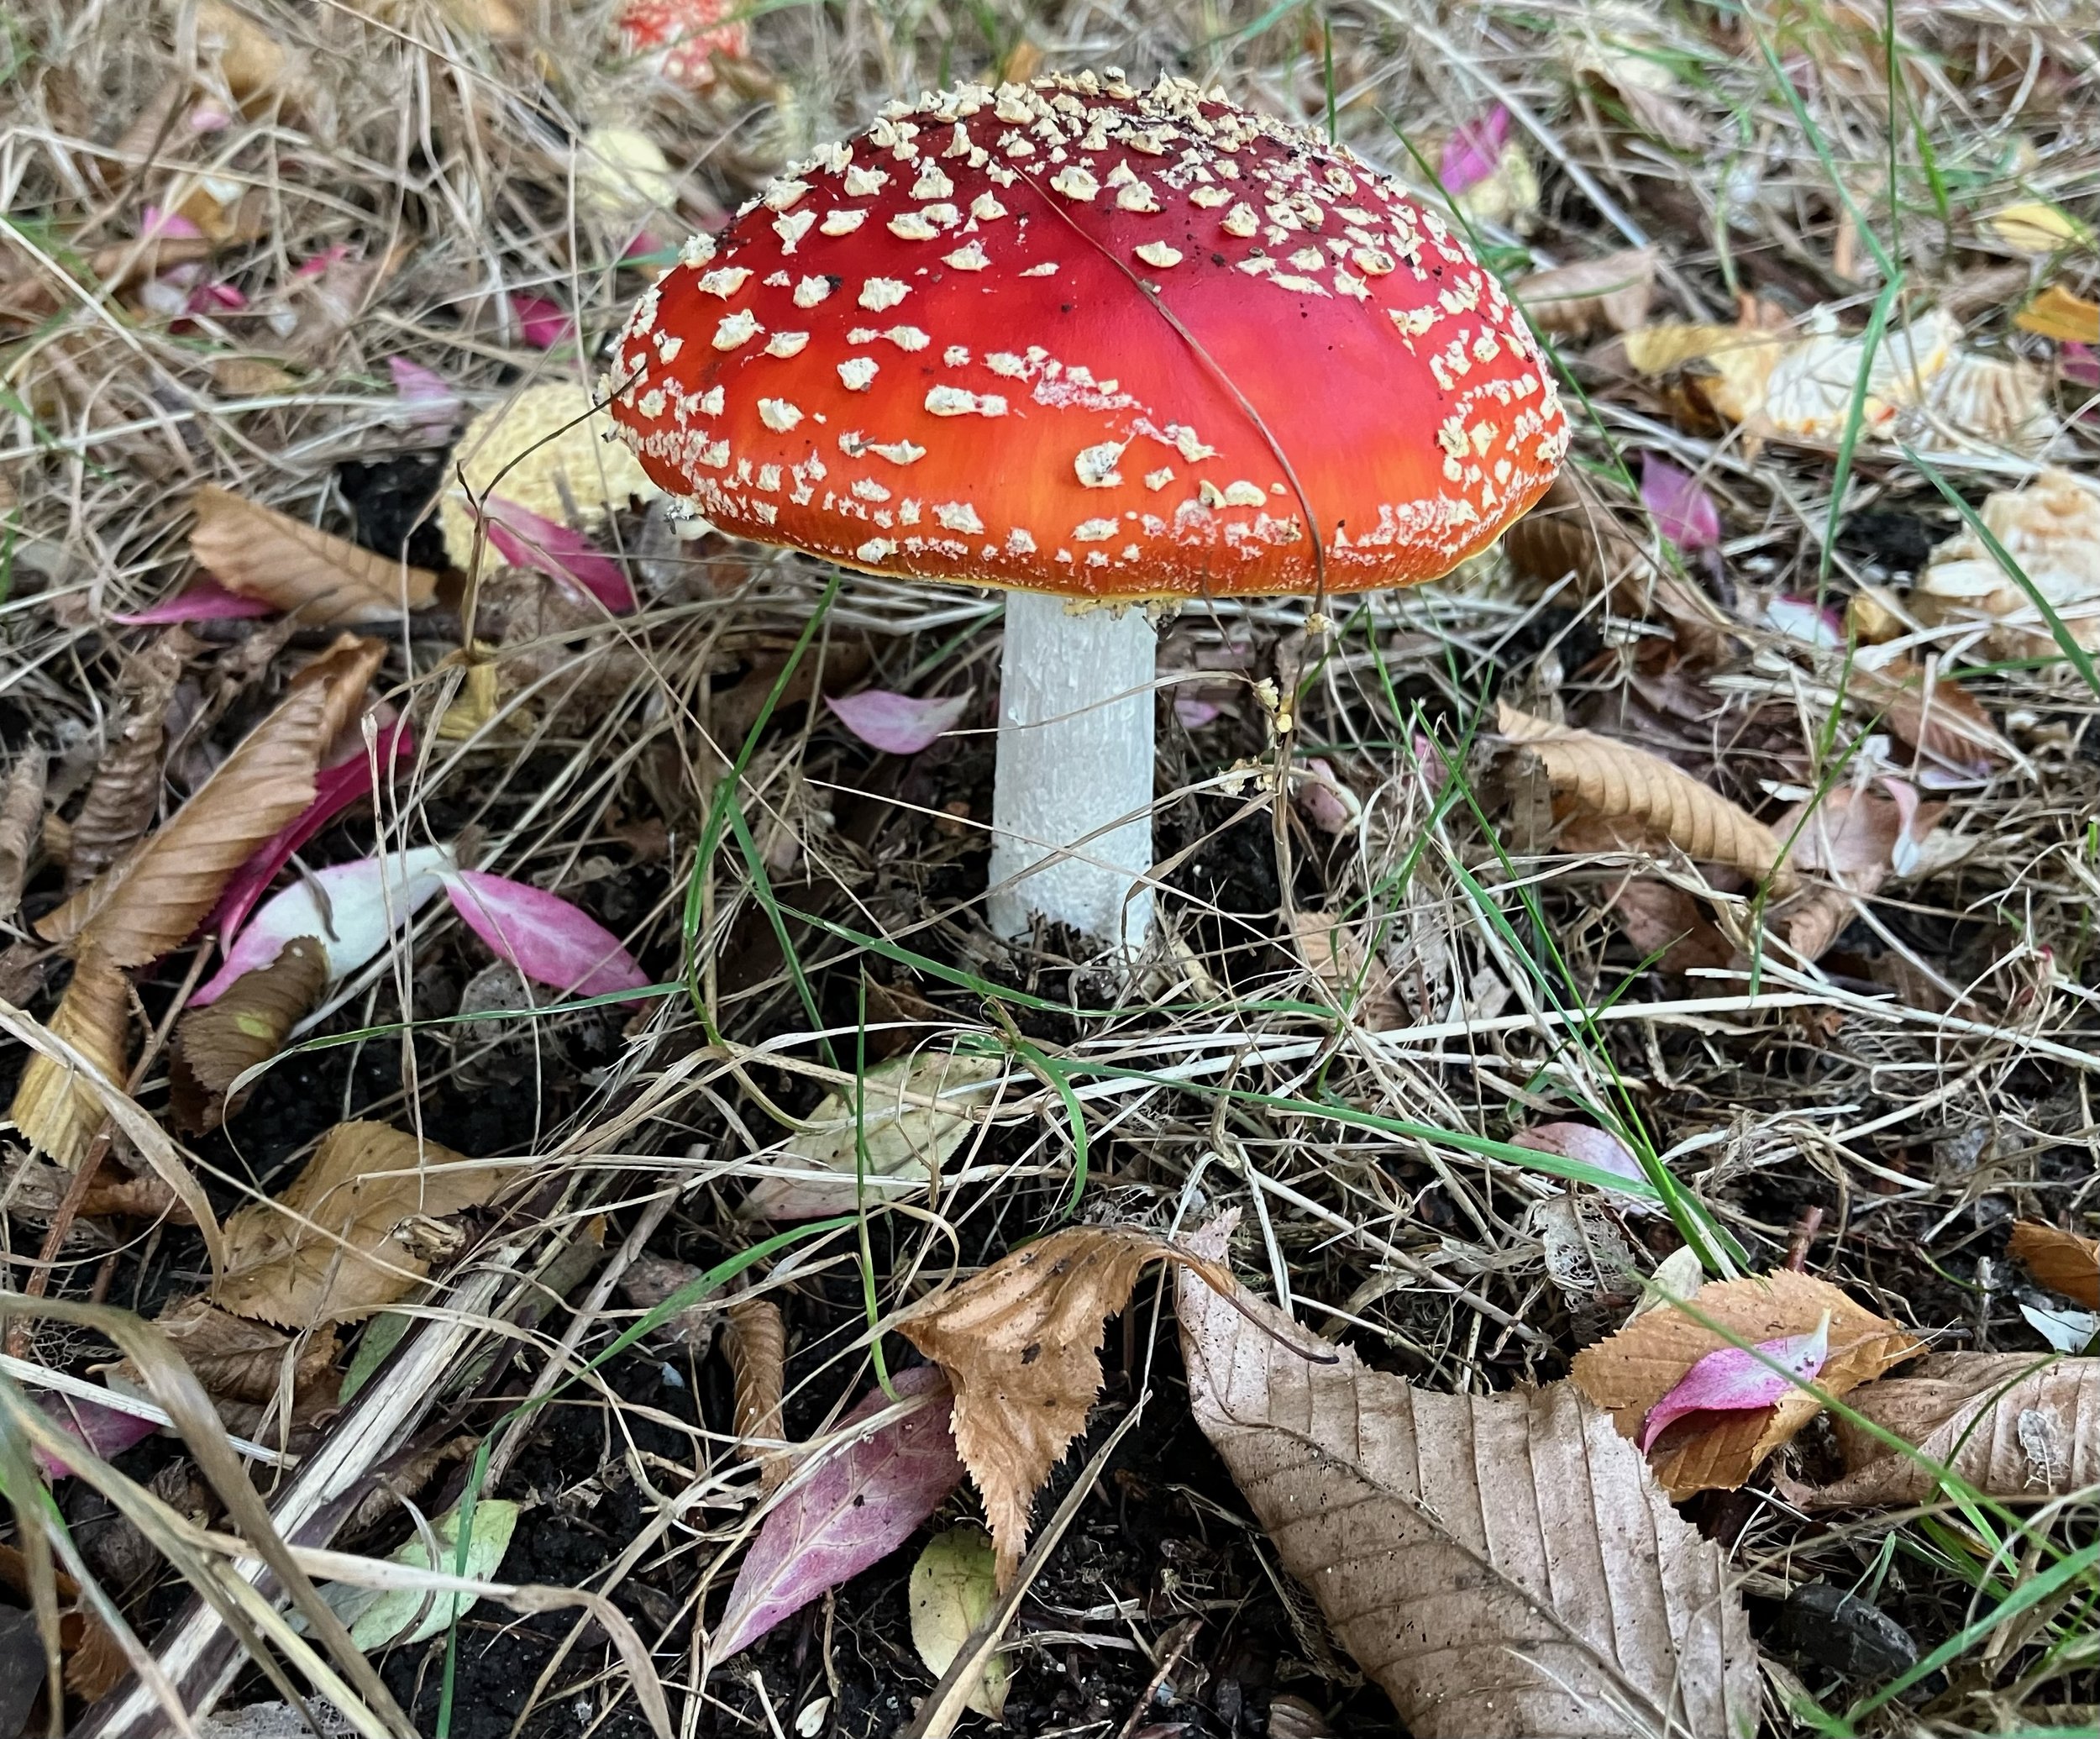 Photo KJ used for his amanita muscaria painting